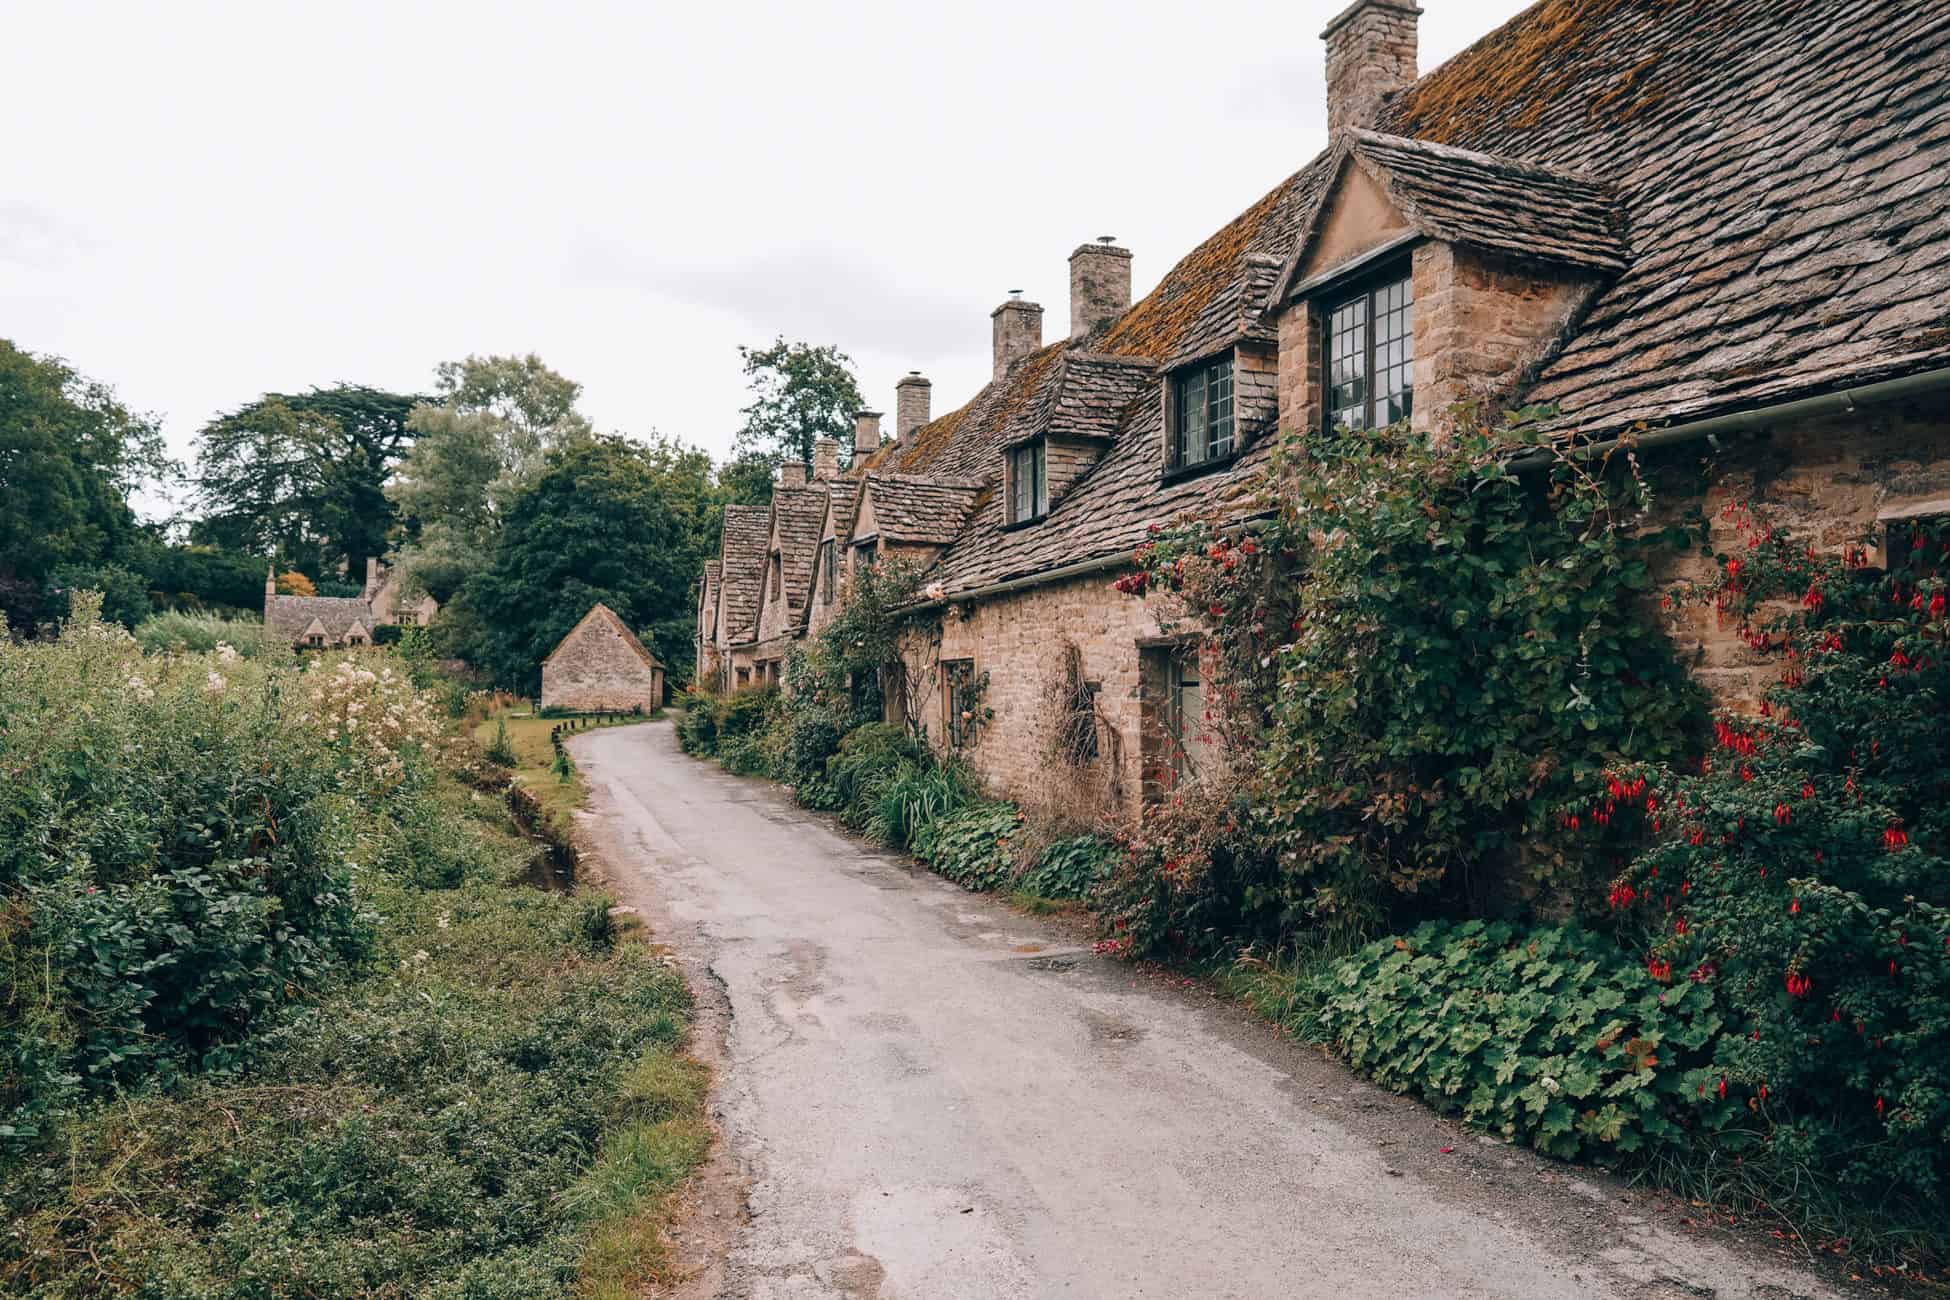 Most Instagrammable places in Cotswolds: Cotswolds’ most photogenic villages